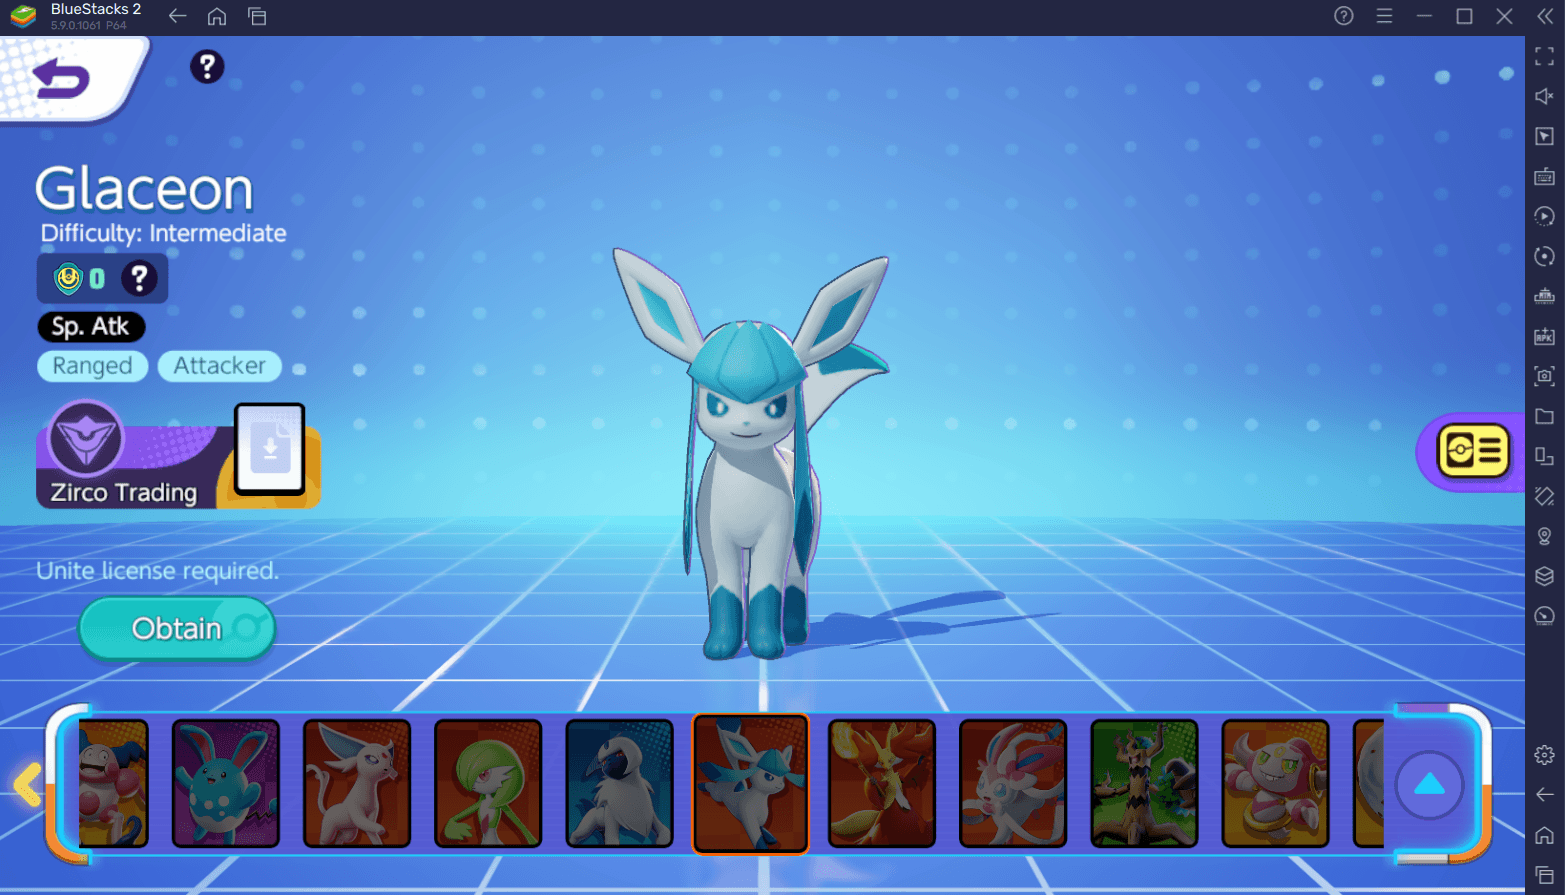 Pokemon Unite Releases New Pokemon Glaceon Along with Balance Changes in New Update